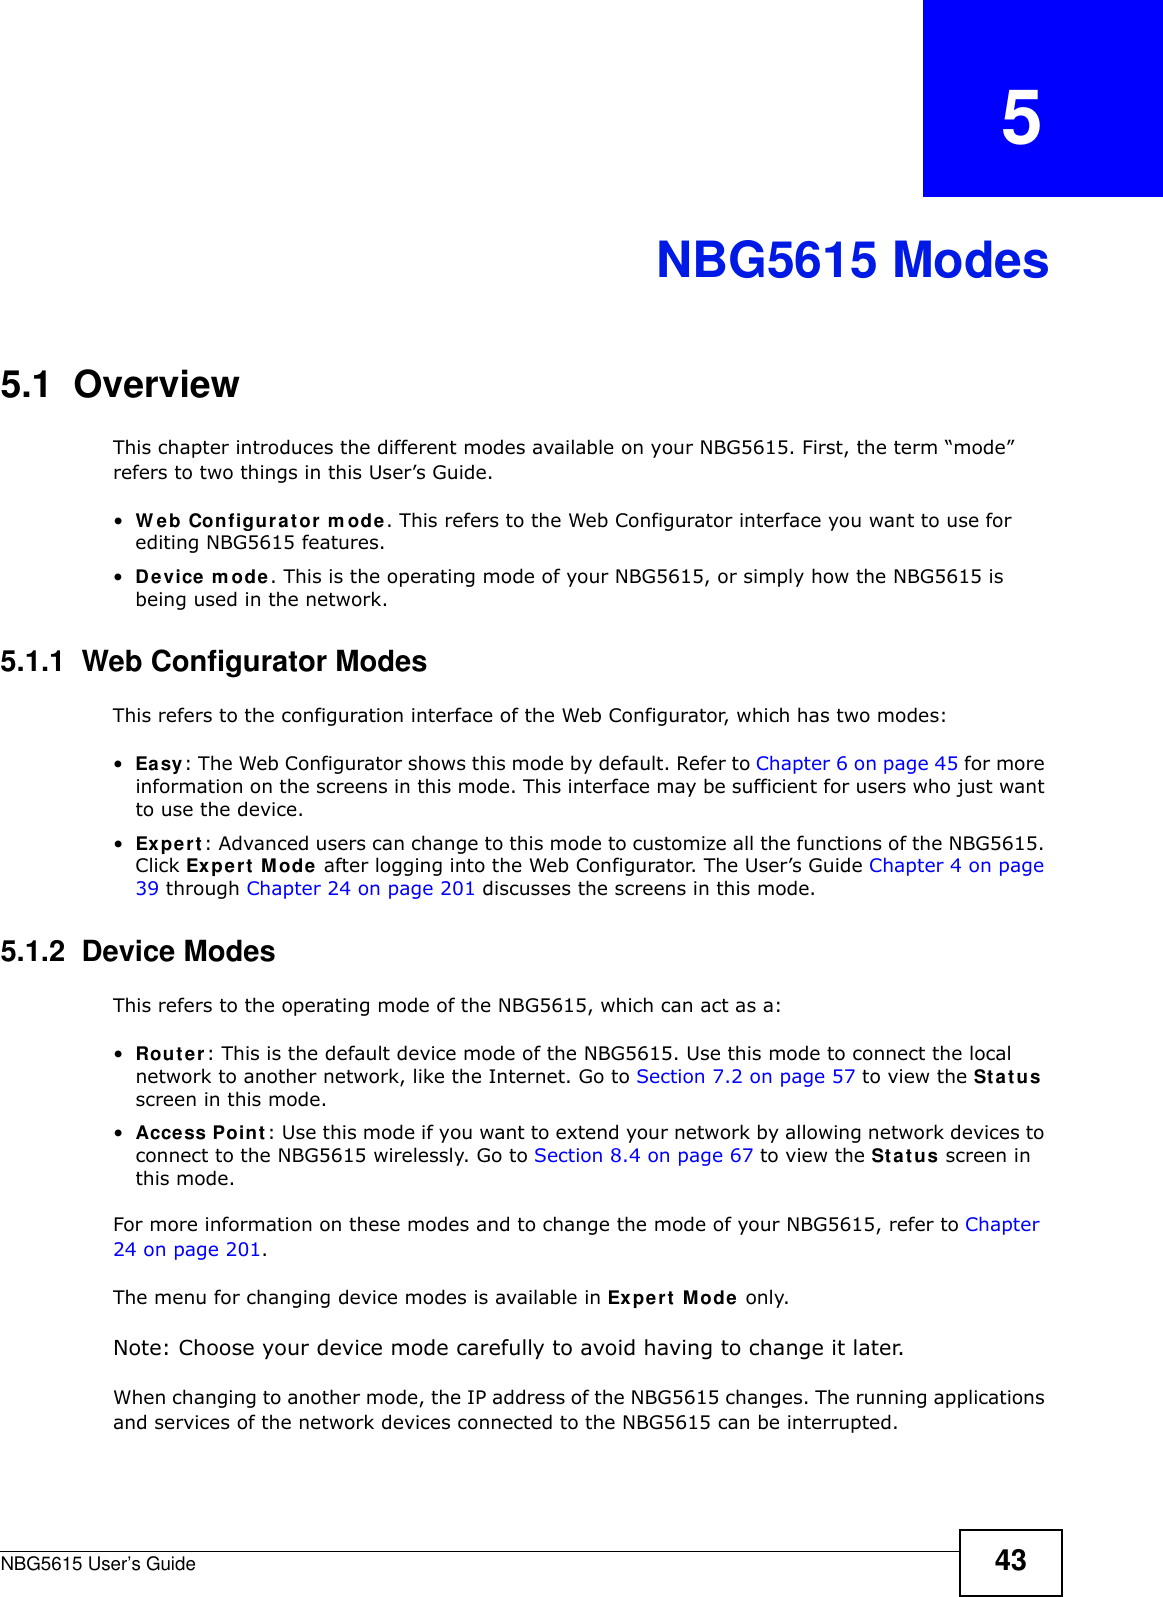 NBG5615 User’s Guide 43CHAPTER   5NBG5615 Modes5.1  OverviewThis chapter introduces the different modes available on your NBG5615. First, the term “mode” refers to two things in this User’s Guide.•W eb Configurator m ode. This refers to the Web Configurator interface you want to use for editing NBG5615 features. •Device m ode. This is the operating mode of your NBG5615, or simply how the NBG5615 is being used in the network. 5.1.1  Web Configurator ModesThis refers to the configuration interface of the Web Configurator, which has two modes:•Easy: The Web Configurator shows this mode by default. Refer to Chapter 6 on page 45 for more information on the screens in this mode. This interface may be sufficient for users who just want to use the device.•Expert: Advanced users can change to this mode to customize all the functions of the NBG5615. Click Expert Mode after logging into the Web Configurator. The User’s Guide Chapter 4 on page 39 through Chapter 24 on page 201 discusses the screens in this mode.5.1.2  Device ModesThis refers to the operating mode of the NBG5615, which can act as a:•Router: This is the default device mode of the NBG5615. Use this mode to connect the local network to another network, like the Internet. Go to Section 7.2 on page 57 to view the Status screen in this mode.•Access Point: Use this mode if you want to extend your network by allowing network devices to connect to the NBG5615 wirelessly. Go to Section 8.4 on page 67 to view the Status screen in this mode.For more information on these modes and to change the mode of your NBG5615, refer to Chapter 24 on page 201.The menu for changing device modes is available in Expert Mode only. Note: Choose your device mode carefully to avoid having to change it later.When changing to another mode, the IP address of the NBG5615 changes. The running applications and services of the network devices connected to the NBG5615 can be interrupted. 